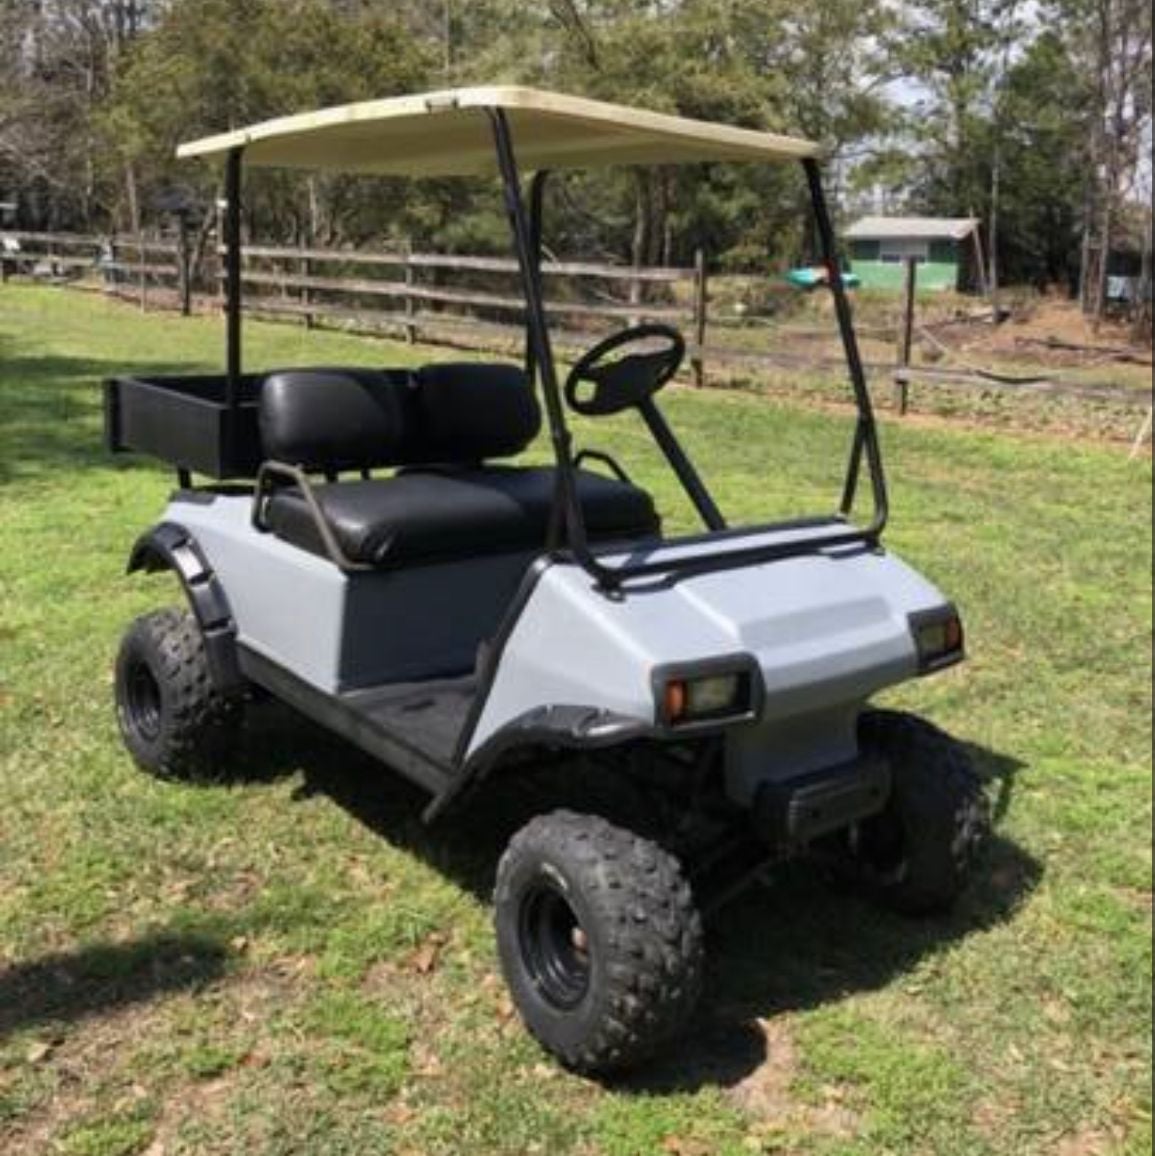 Golf cart club car - The Hull Truth - Boating and Fishing Forum